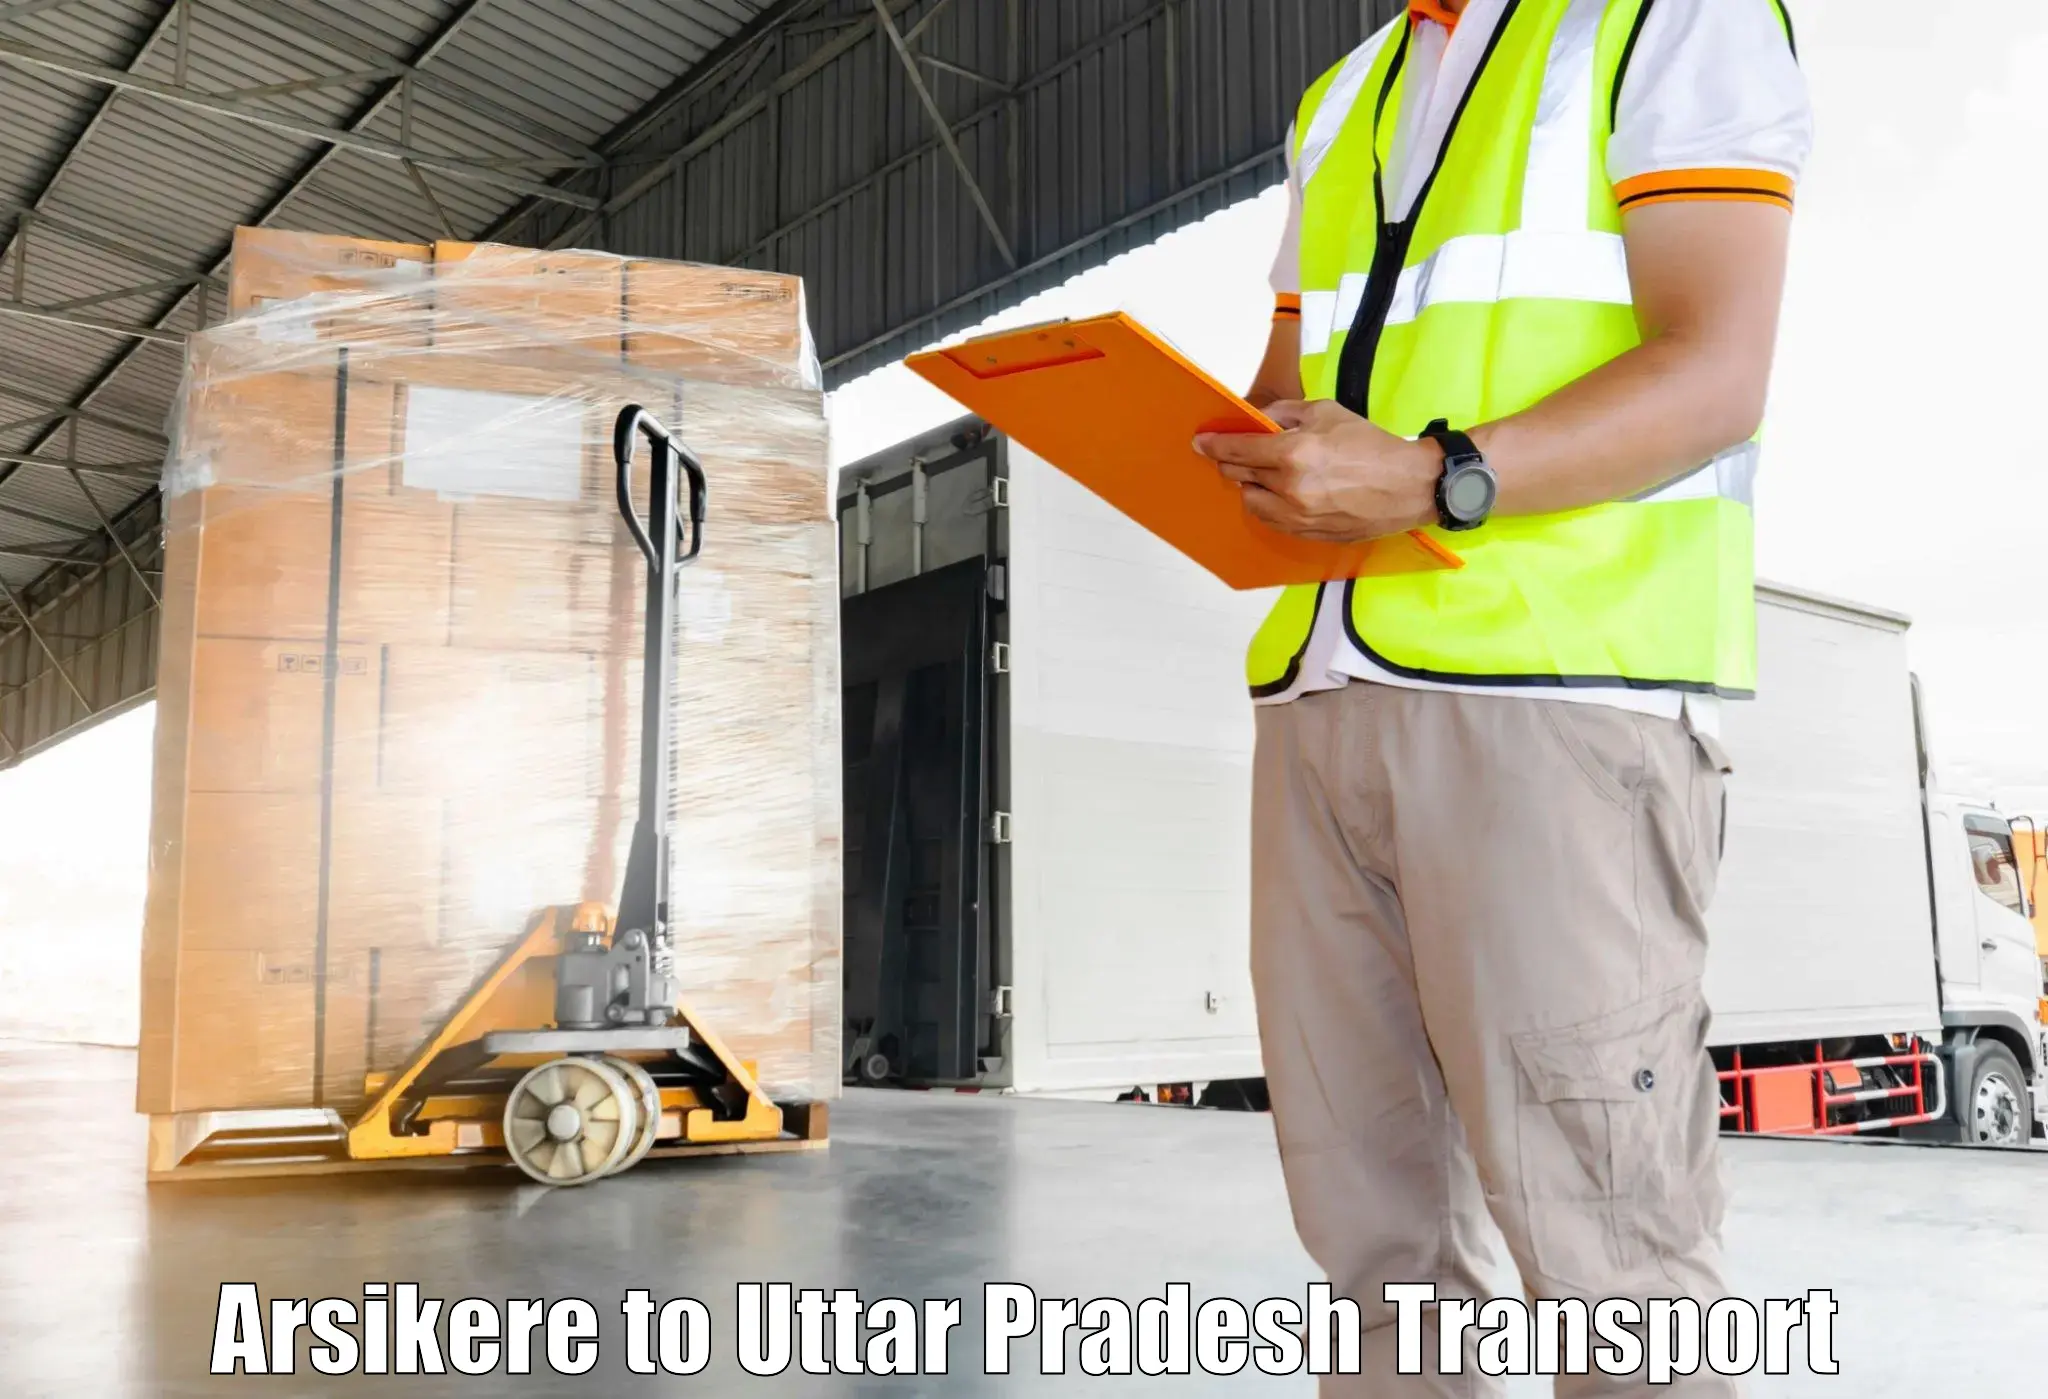 Furniture transport service Arsikere to Shahjahanpur